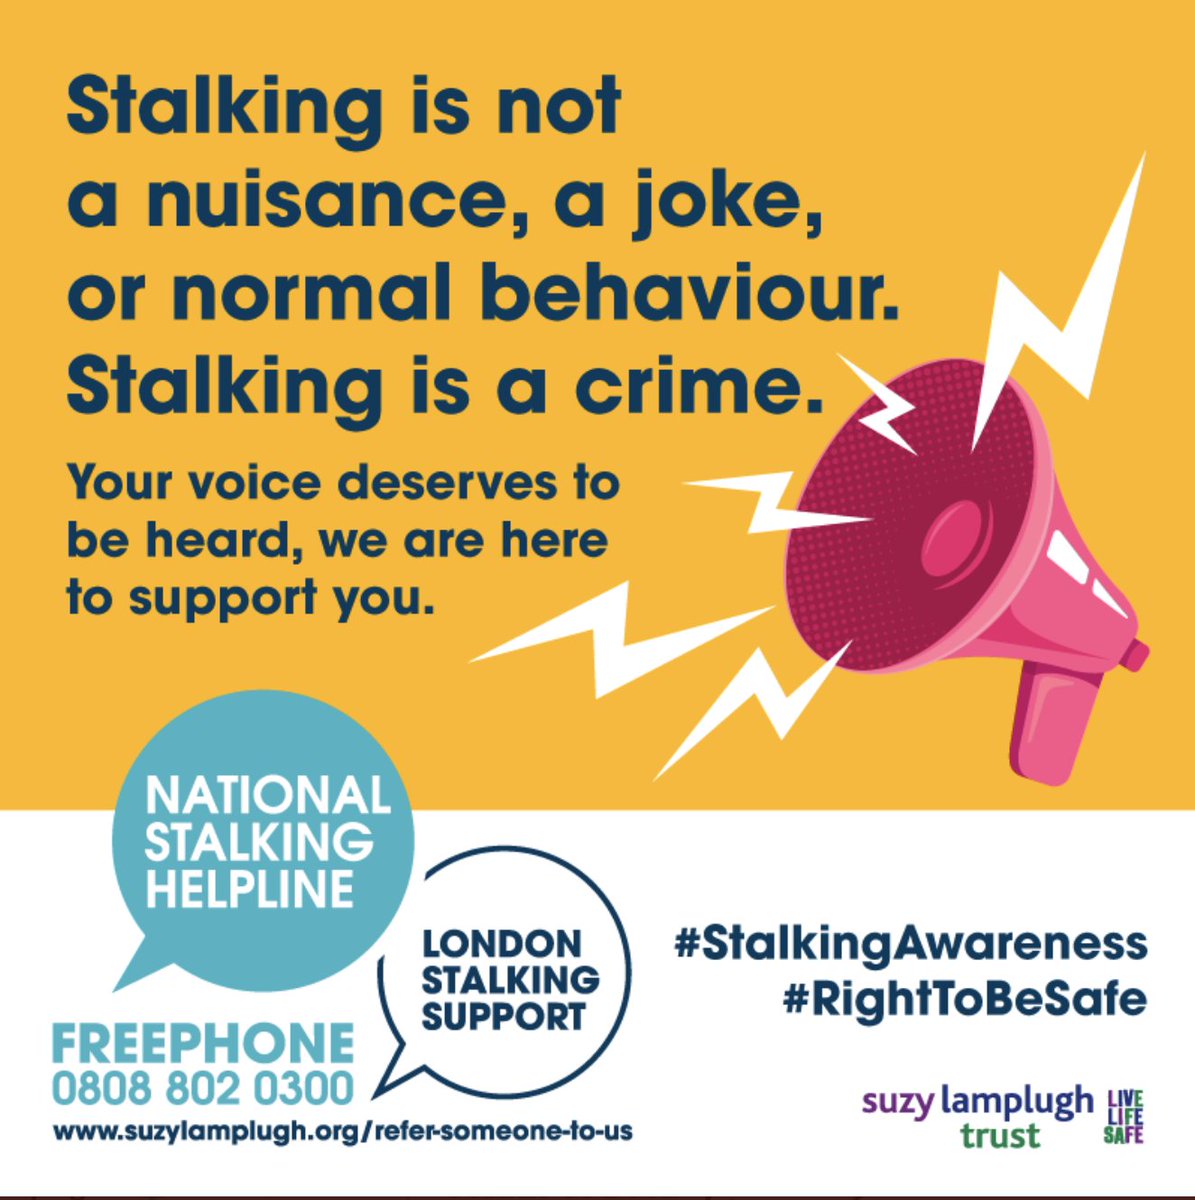 You are not alone, our specialist #stalking advocates are here to help. If you, or someone you know, has been a victim of stalking, you can get in contact with @TalkingStalking at 0808 802 0300 or through our online tool suzylamplugh.org/am-i-being-sta…. #StalkingAwareness